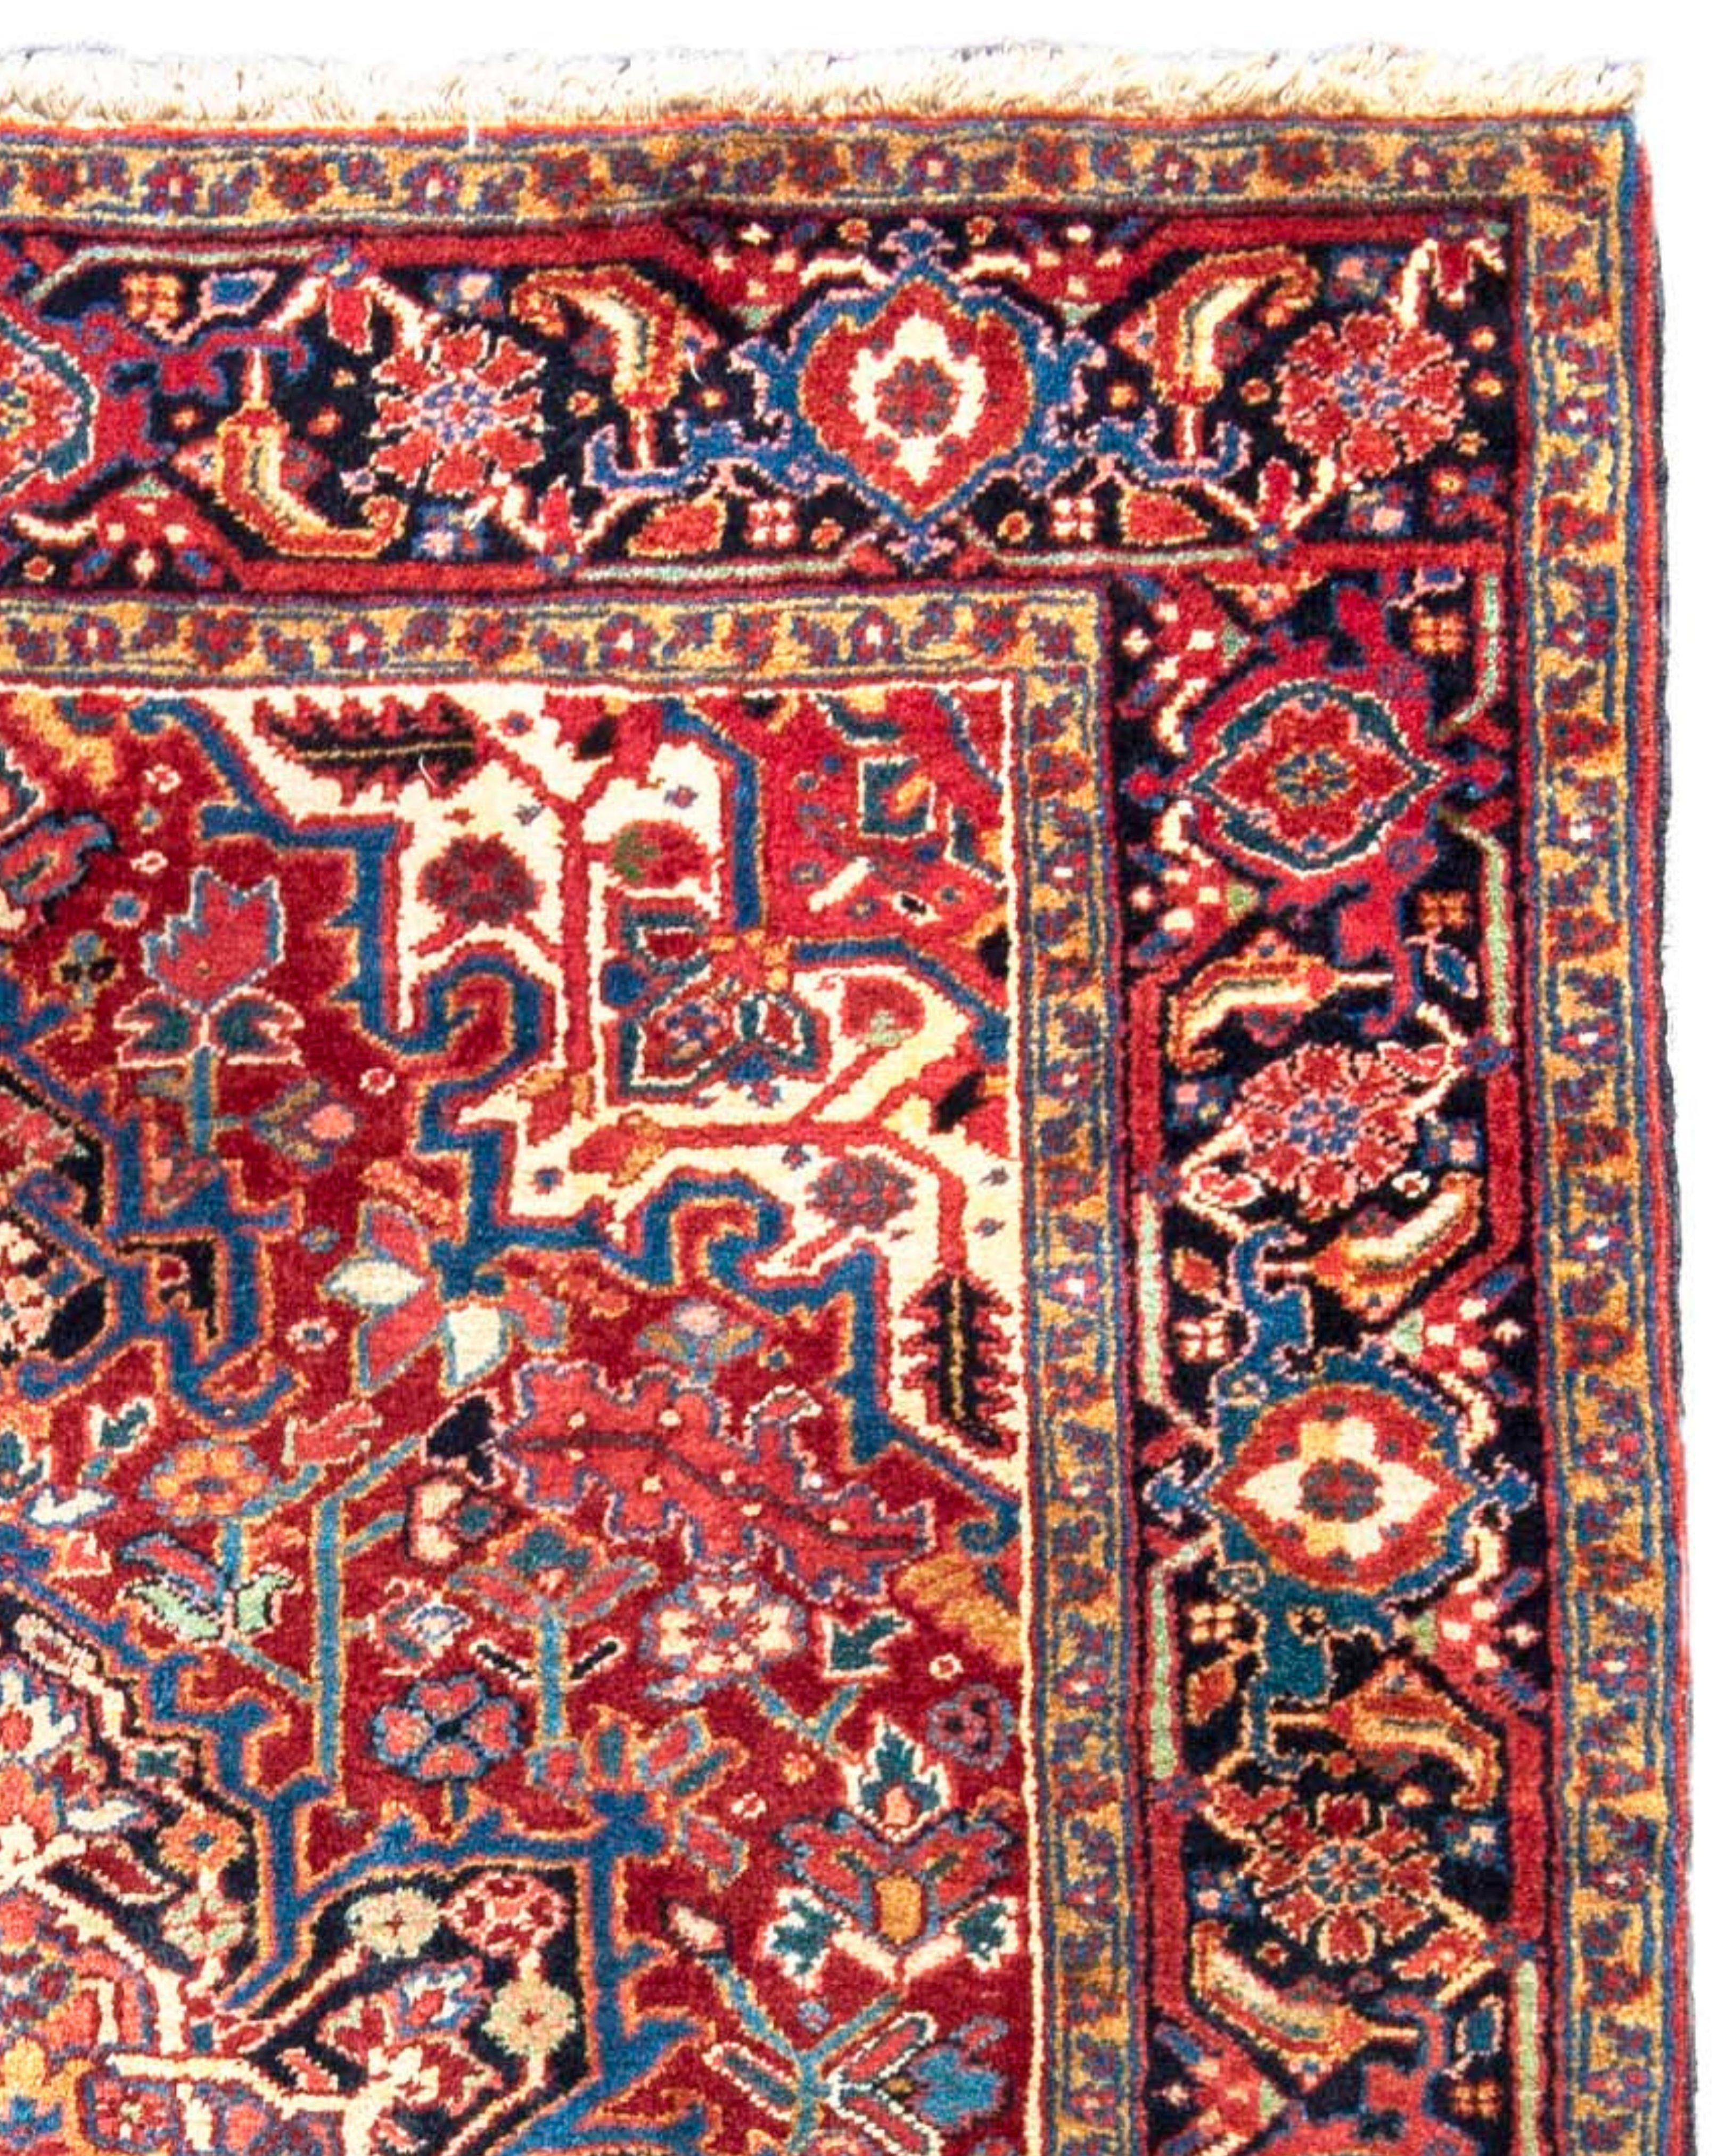 Heriz Rug, Mid-20th Century

Heriz rugs and carpets were woven in Northwest Persia starting in the mid 19th century in response to a great increase in demand for rugs internationally. Prior to that, there were not rugs woven (in Persia) for export